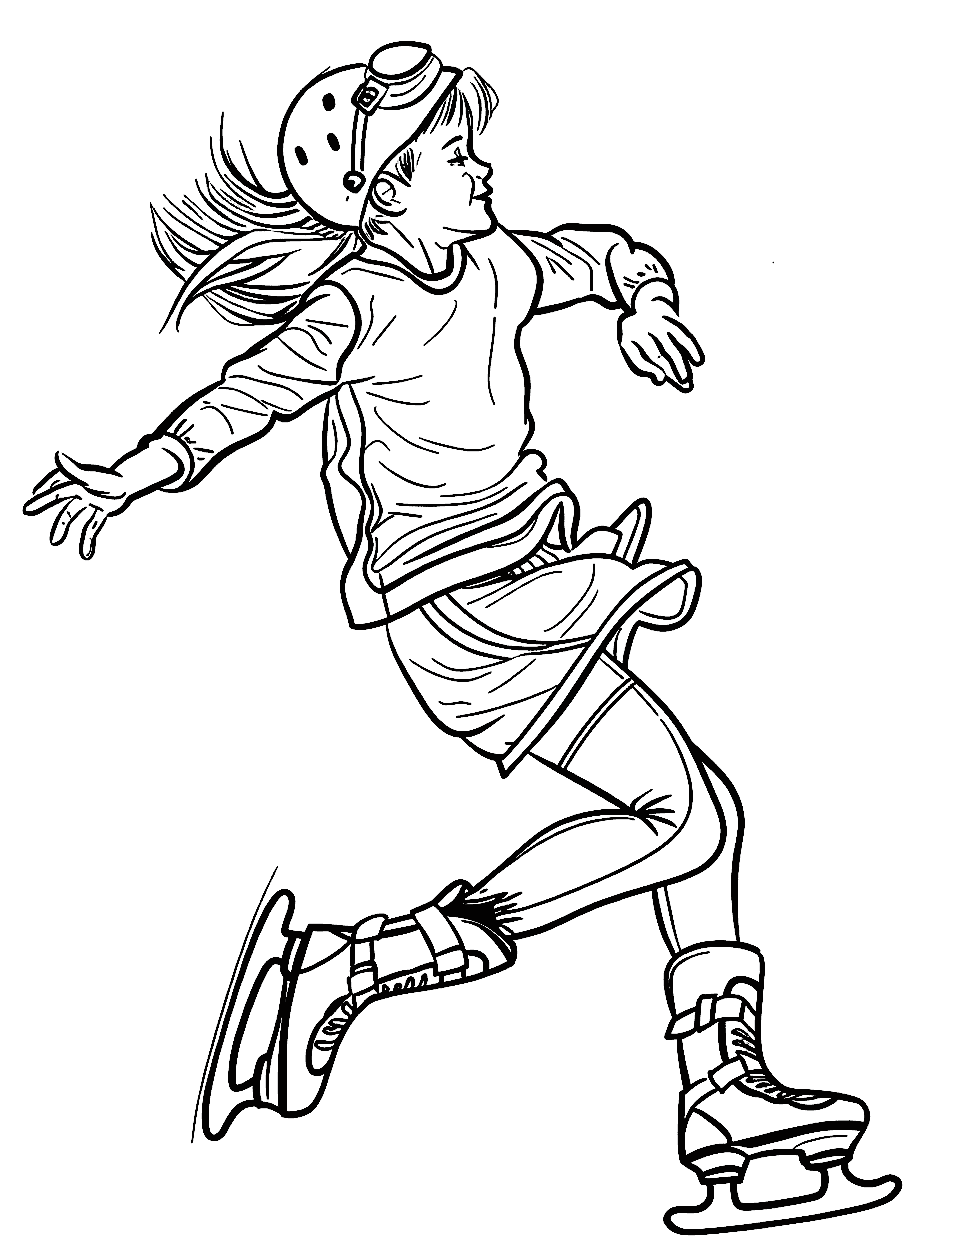 Skating on Ice Sports Coloring Page - A figure skater performing a spin on an ice rink.